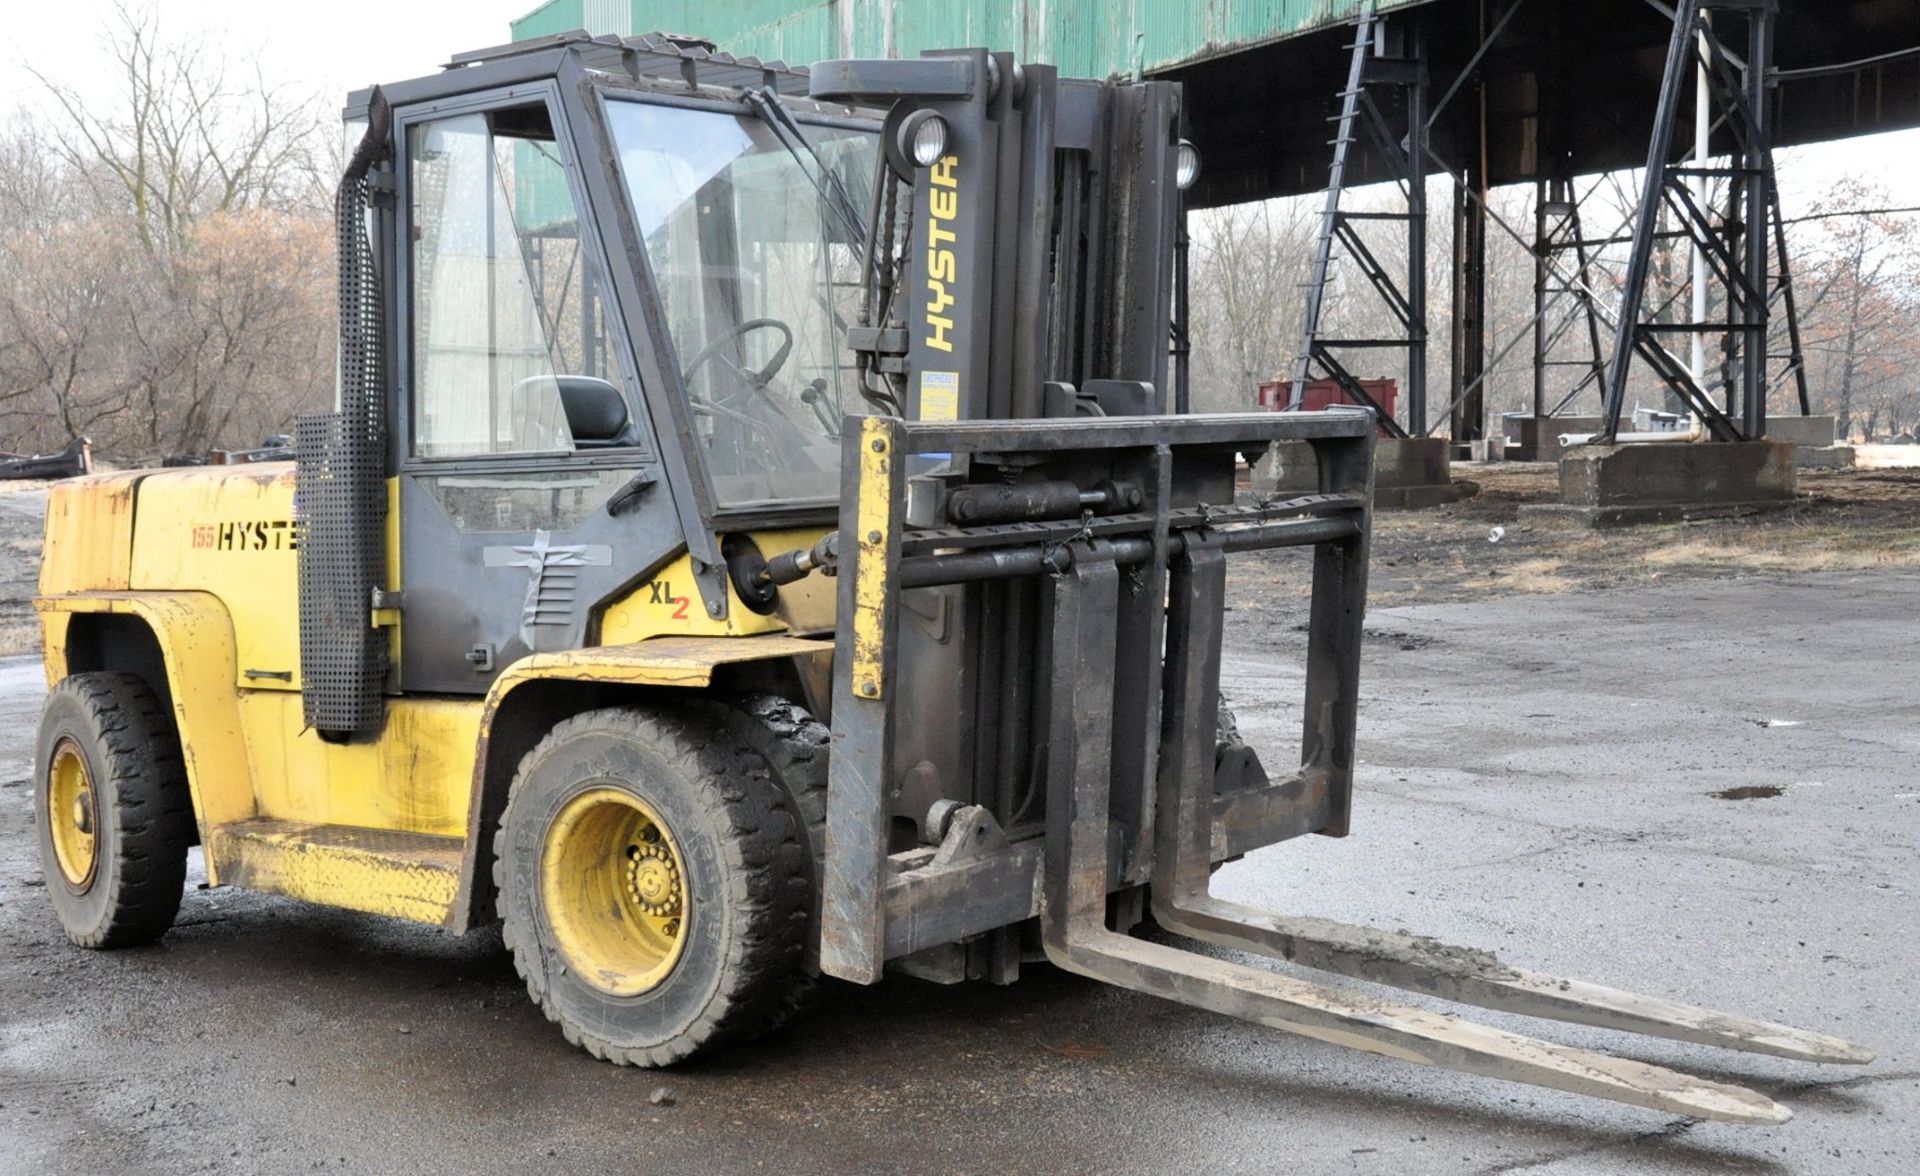 Hyster Model H155XL, Approx. 15,000 Lb. Capacity, 240" Lift Capacity, Diesel Fuel Fork Lift Truck, - Image 2 of 3